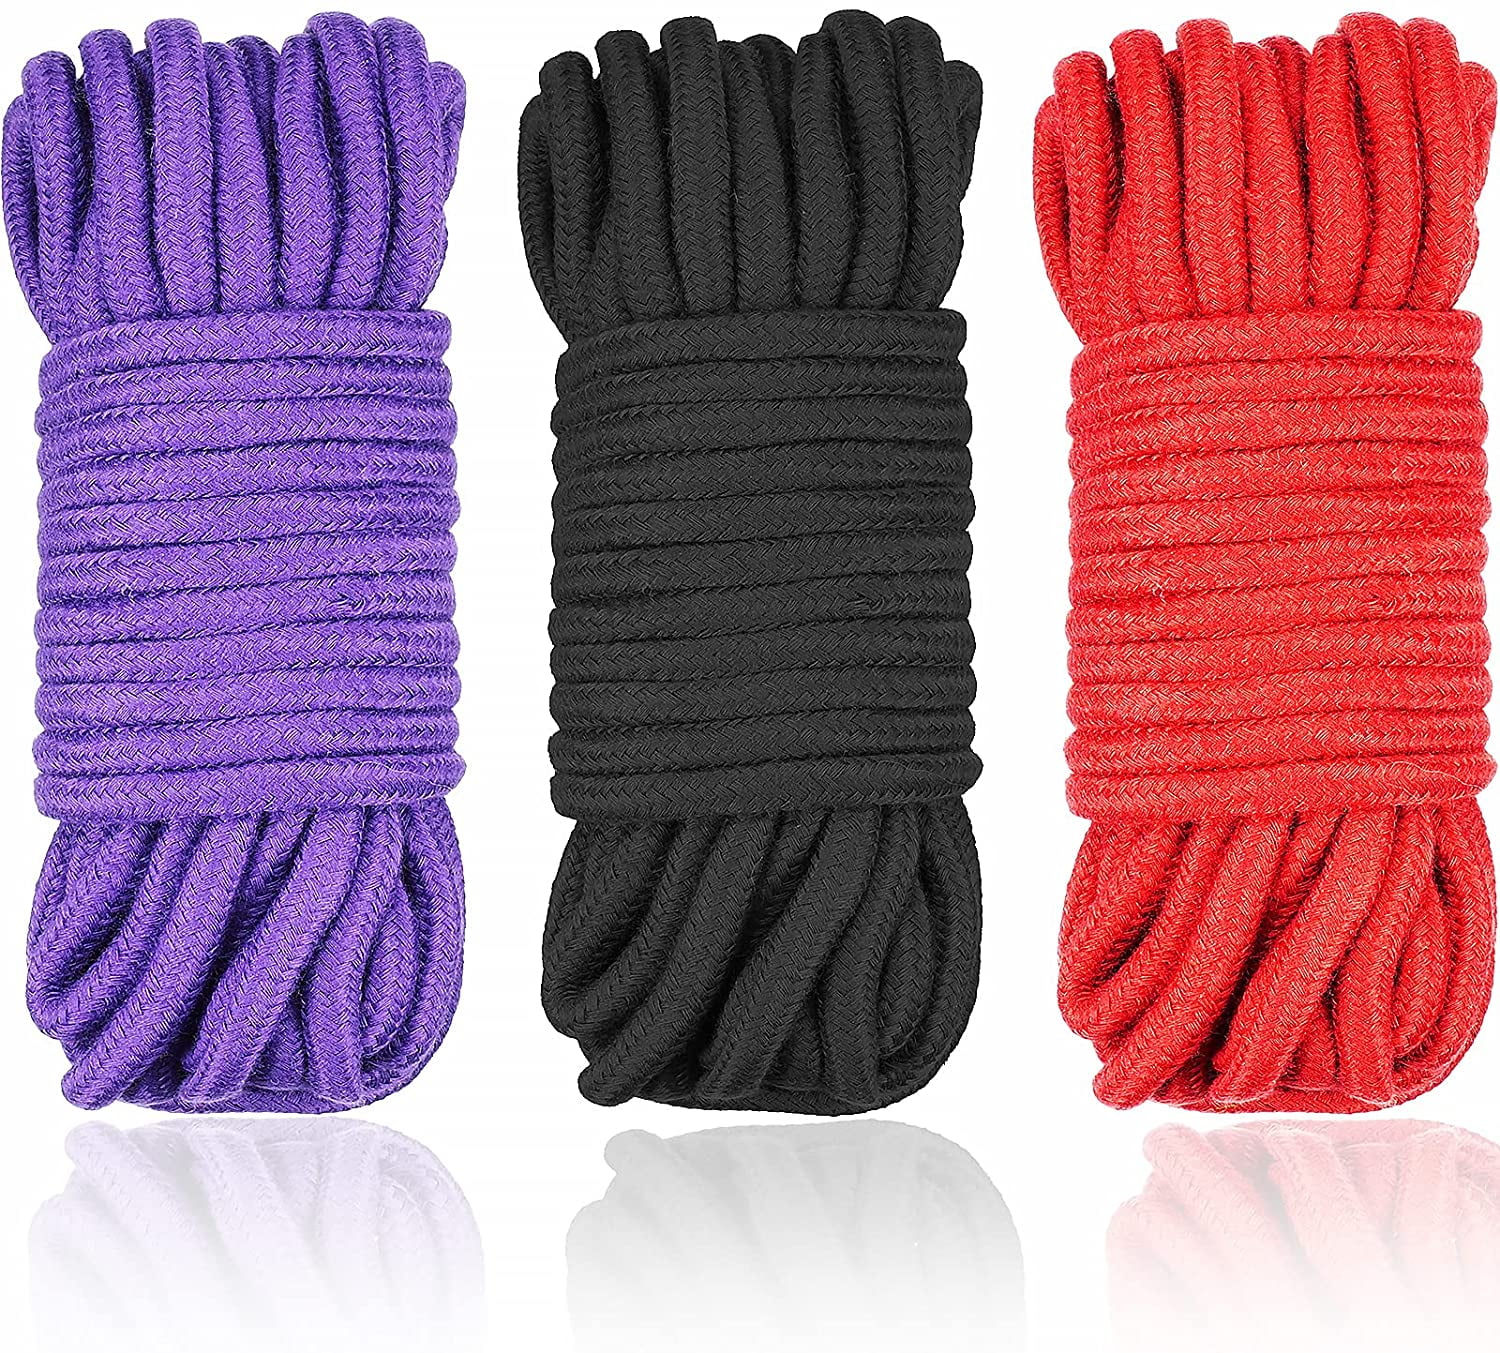 Red Soft Cotton Rope-32 feet 10m Multi-Function Natural Durable Long Rope